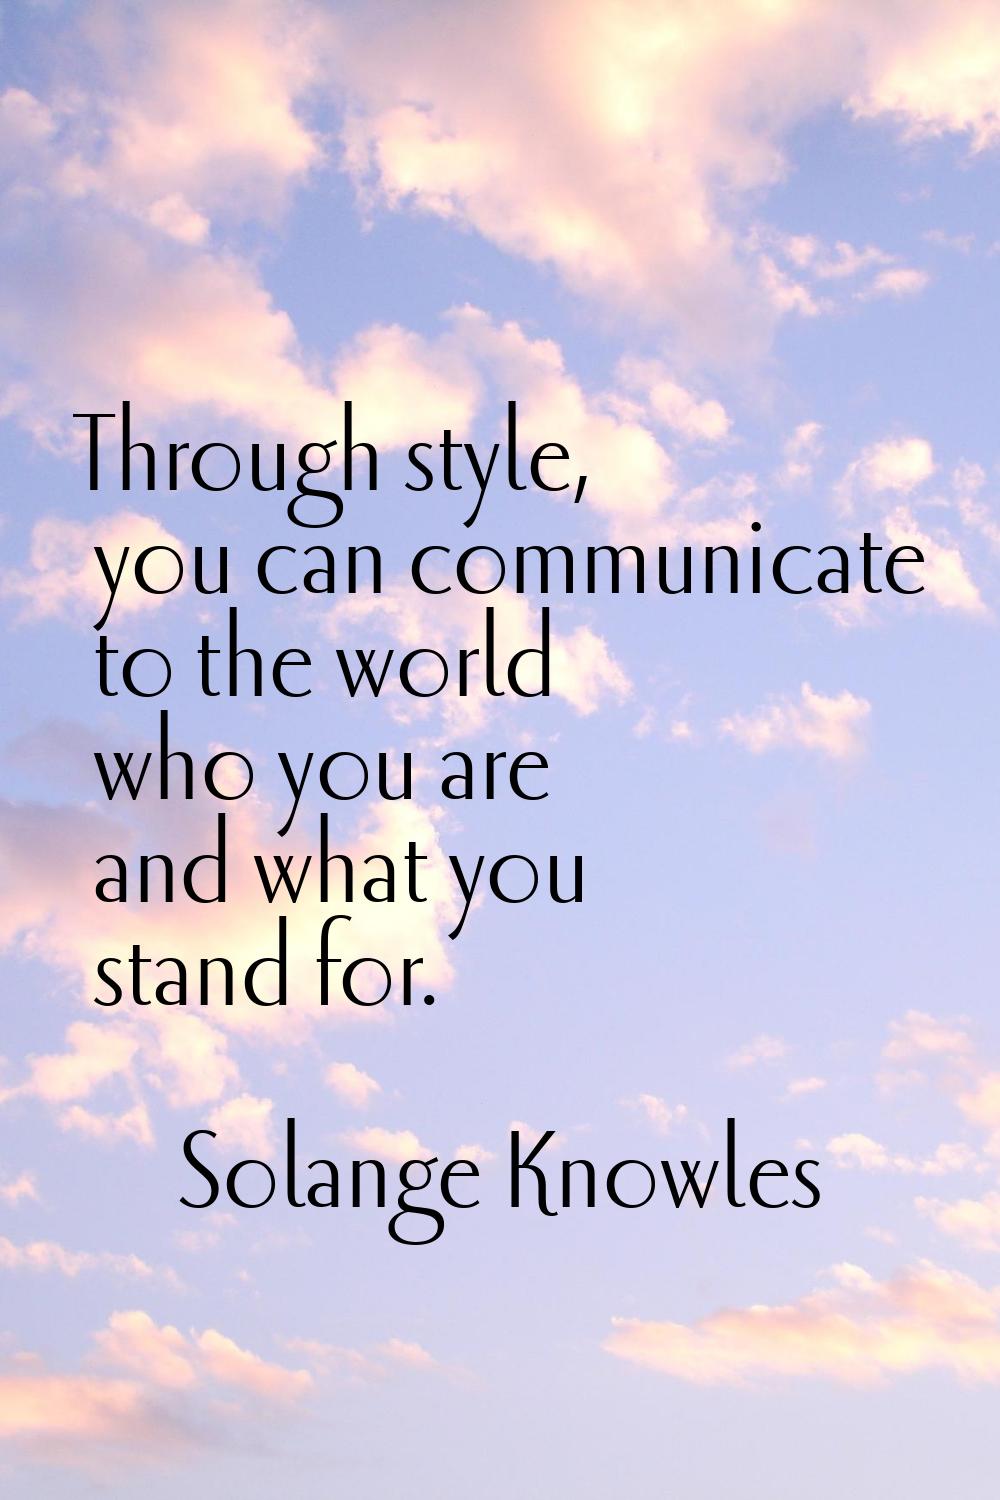 Through style, you can communicate to the world who you are and what you stand for.